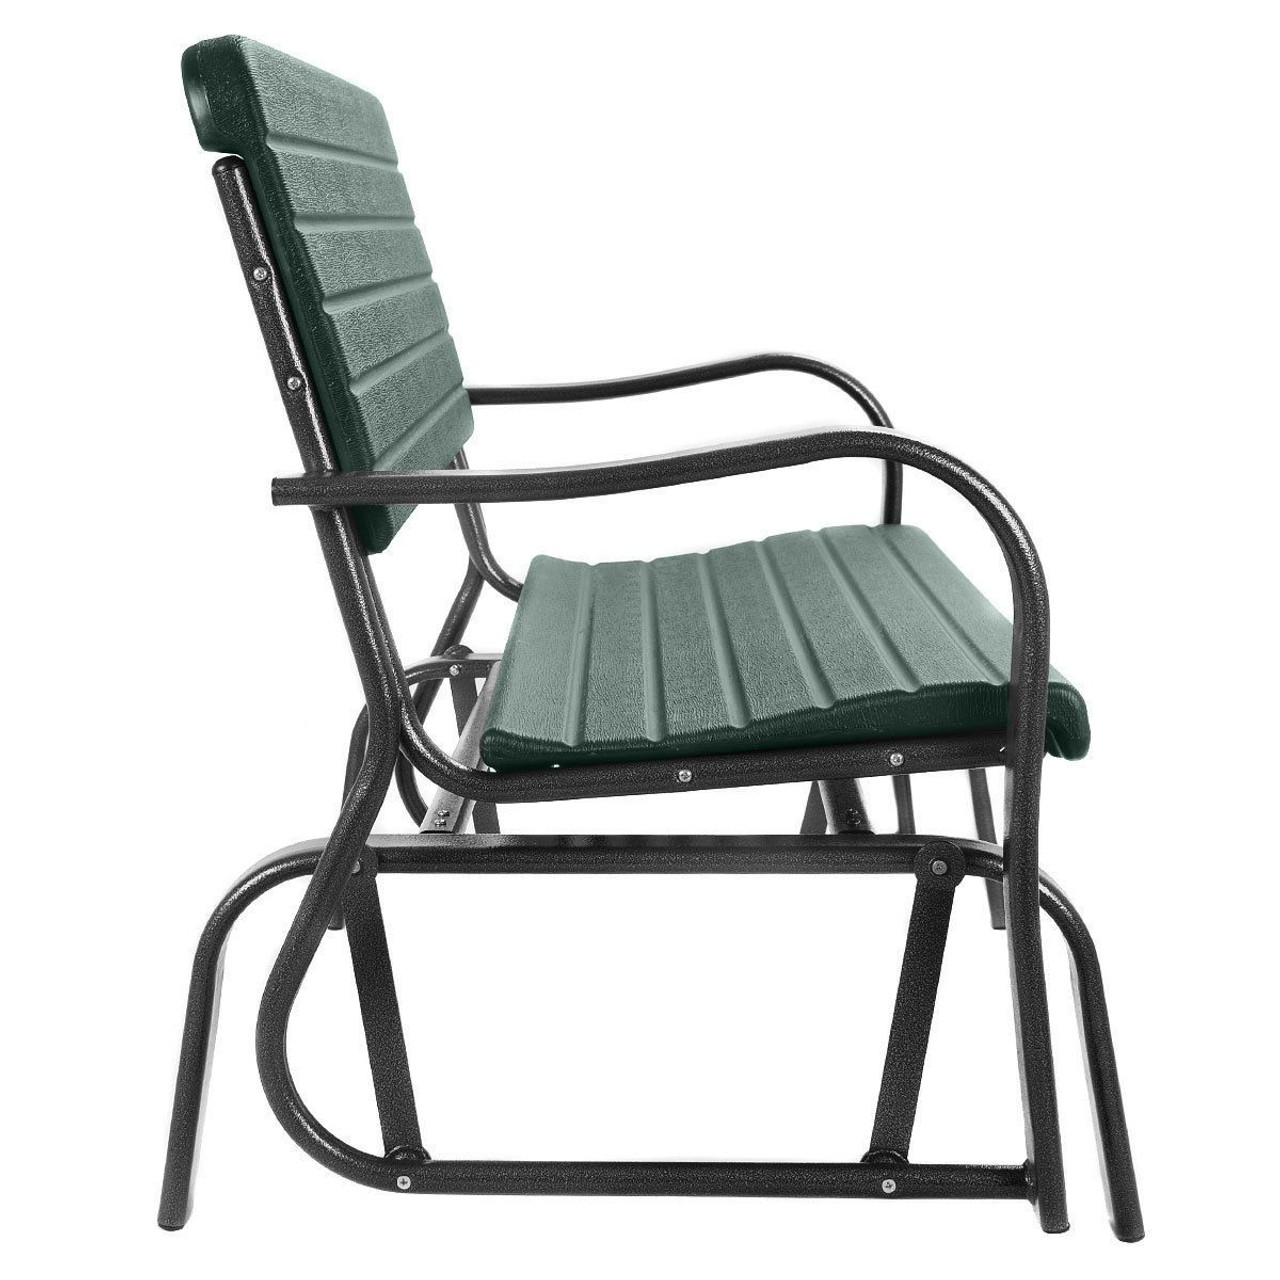 Outdoor Patio Steel Swing Bench Loveseat product image